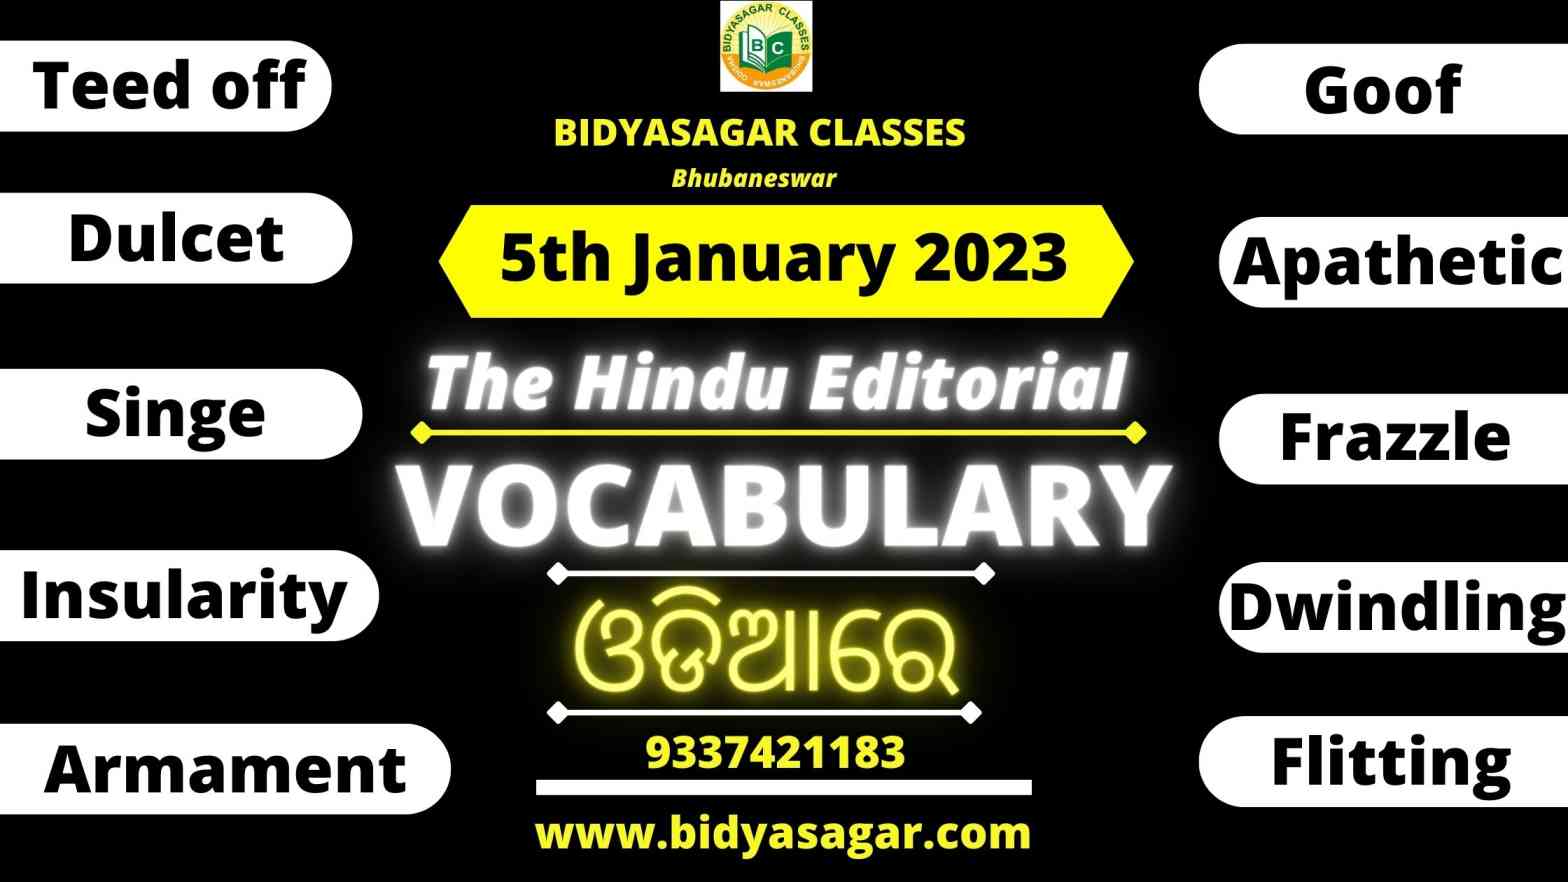 The Hindu Editorial Vocabulary of 5th January 2023